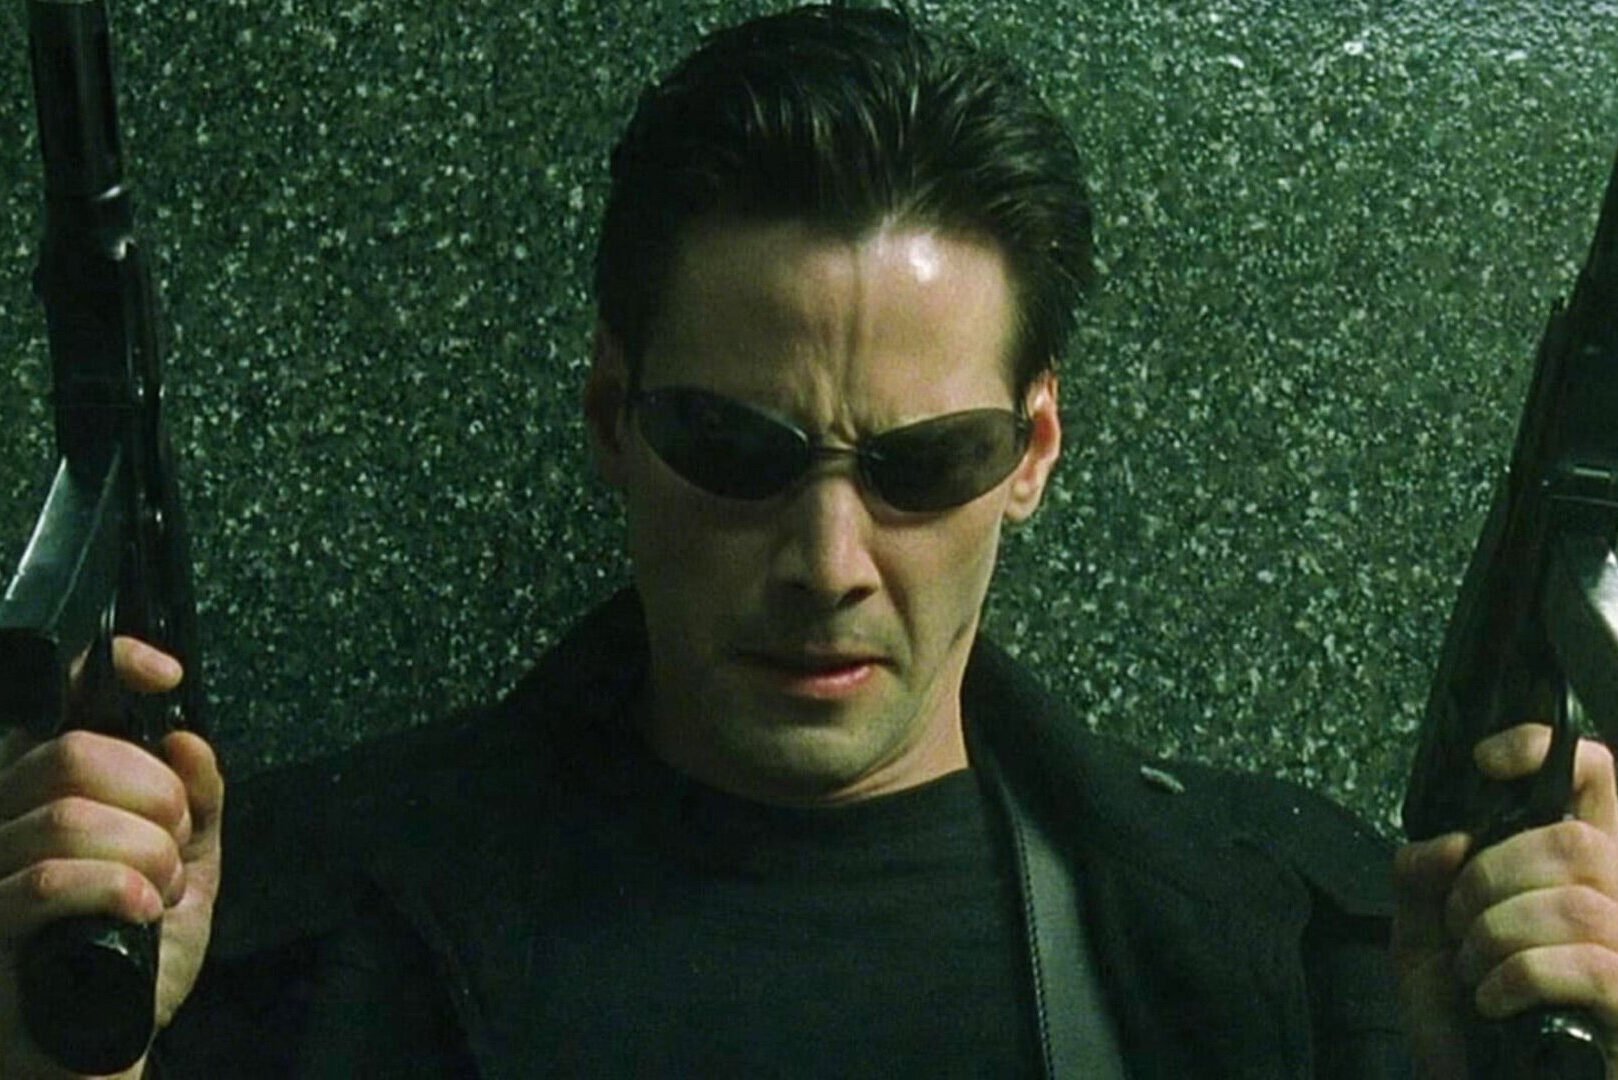 Keanu Reeves And The Matrix 4 Under Fire For Faking Filming To Cheat on COVID Restrictions